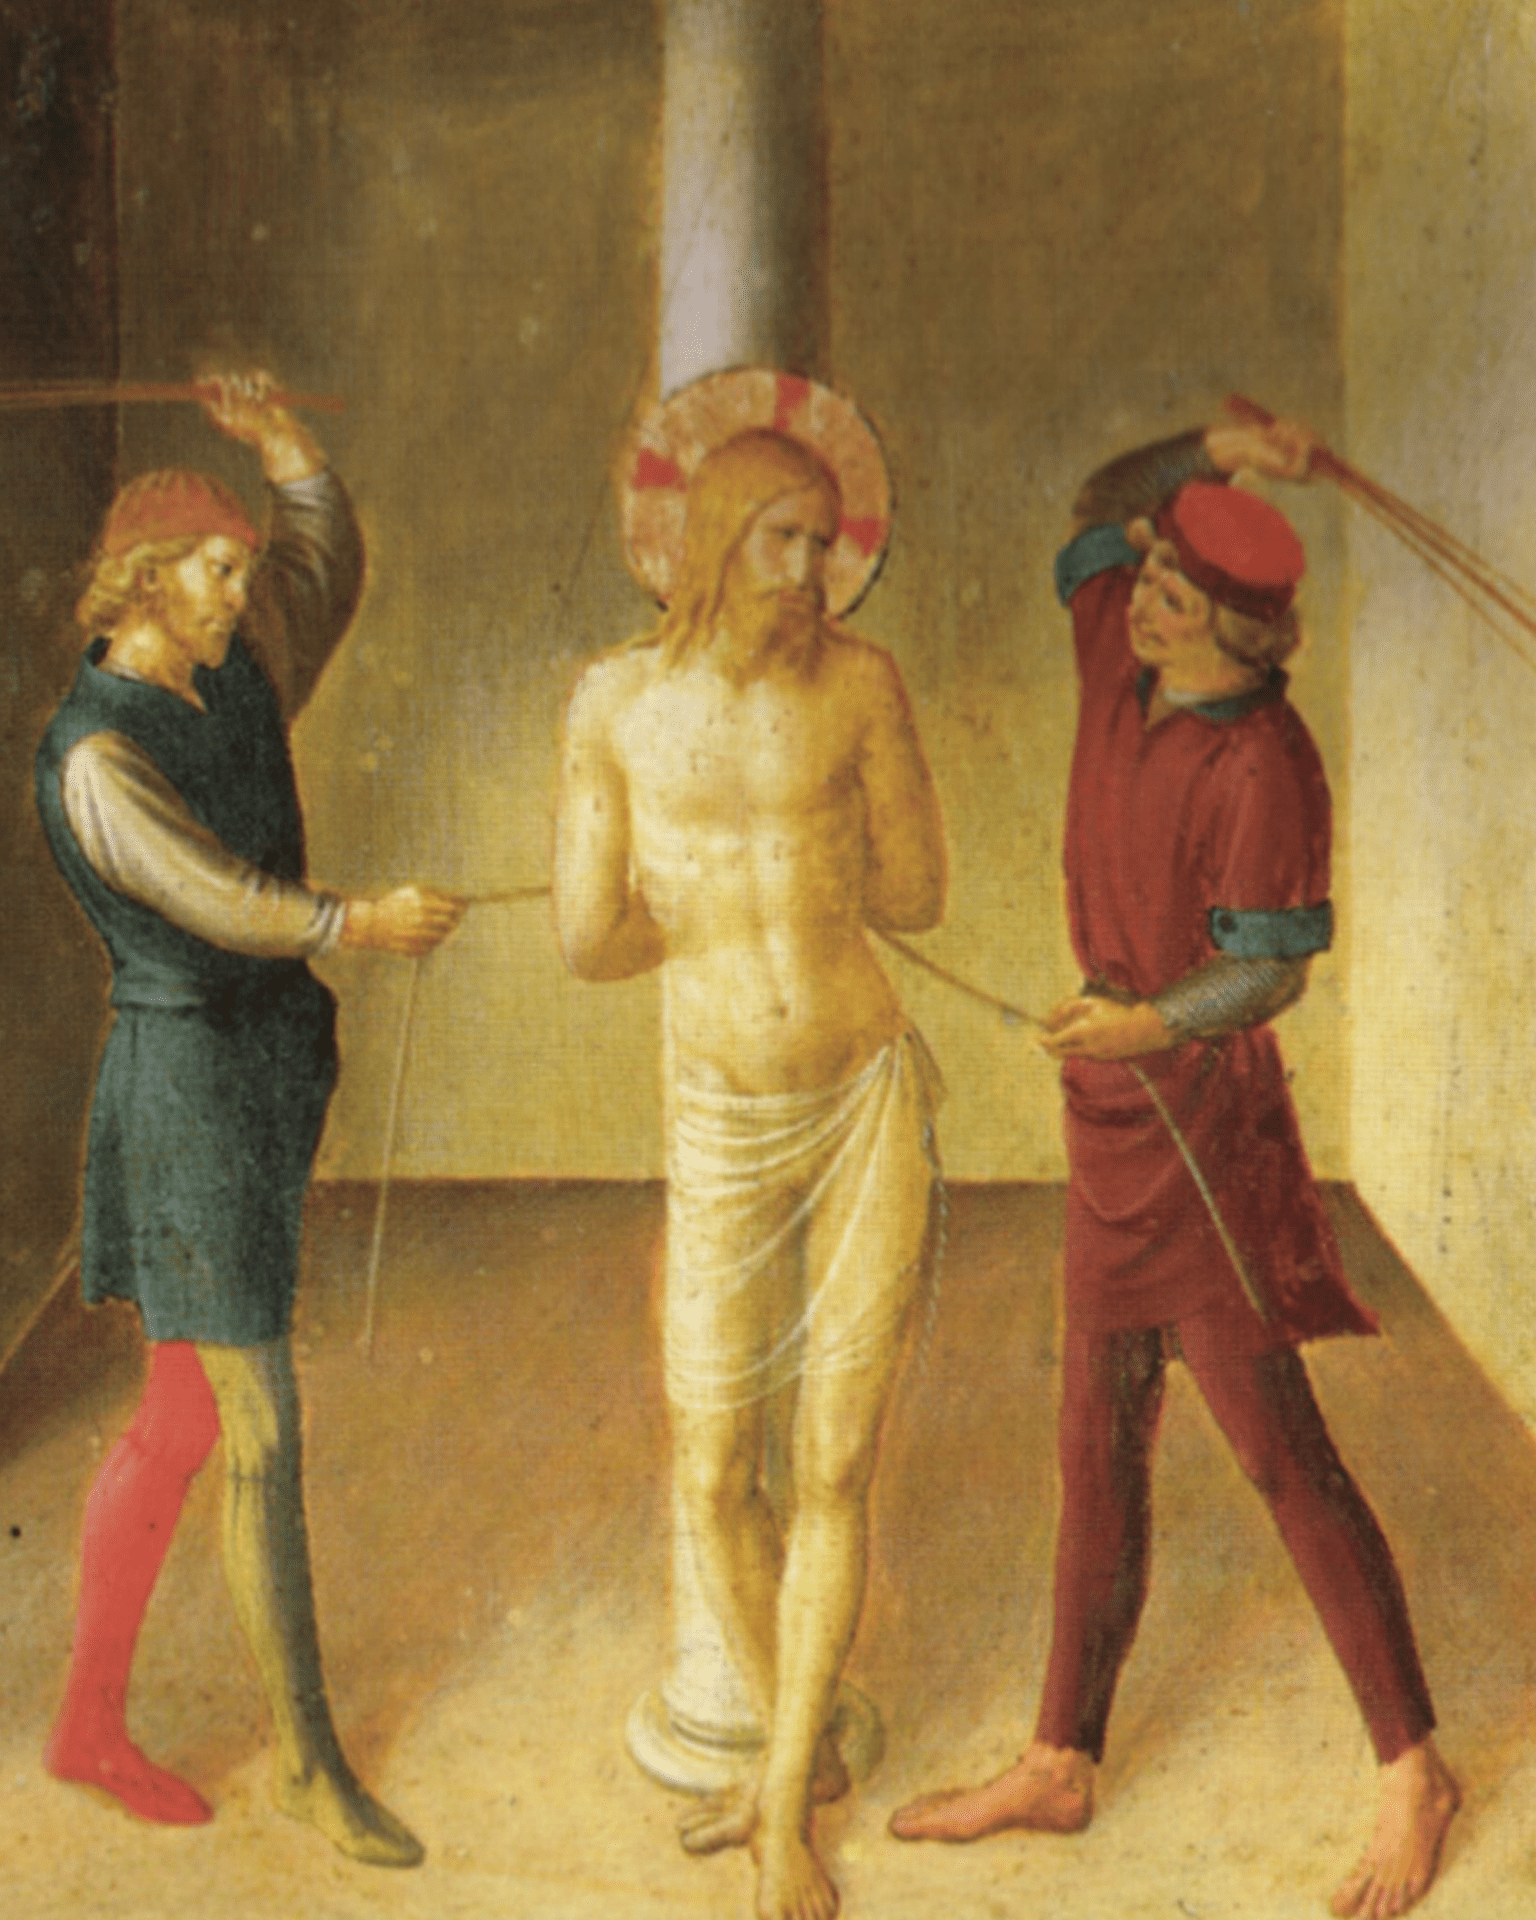 2. scourging